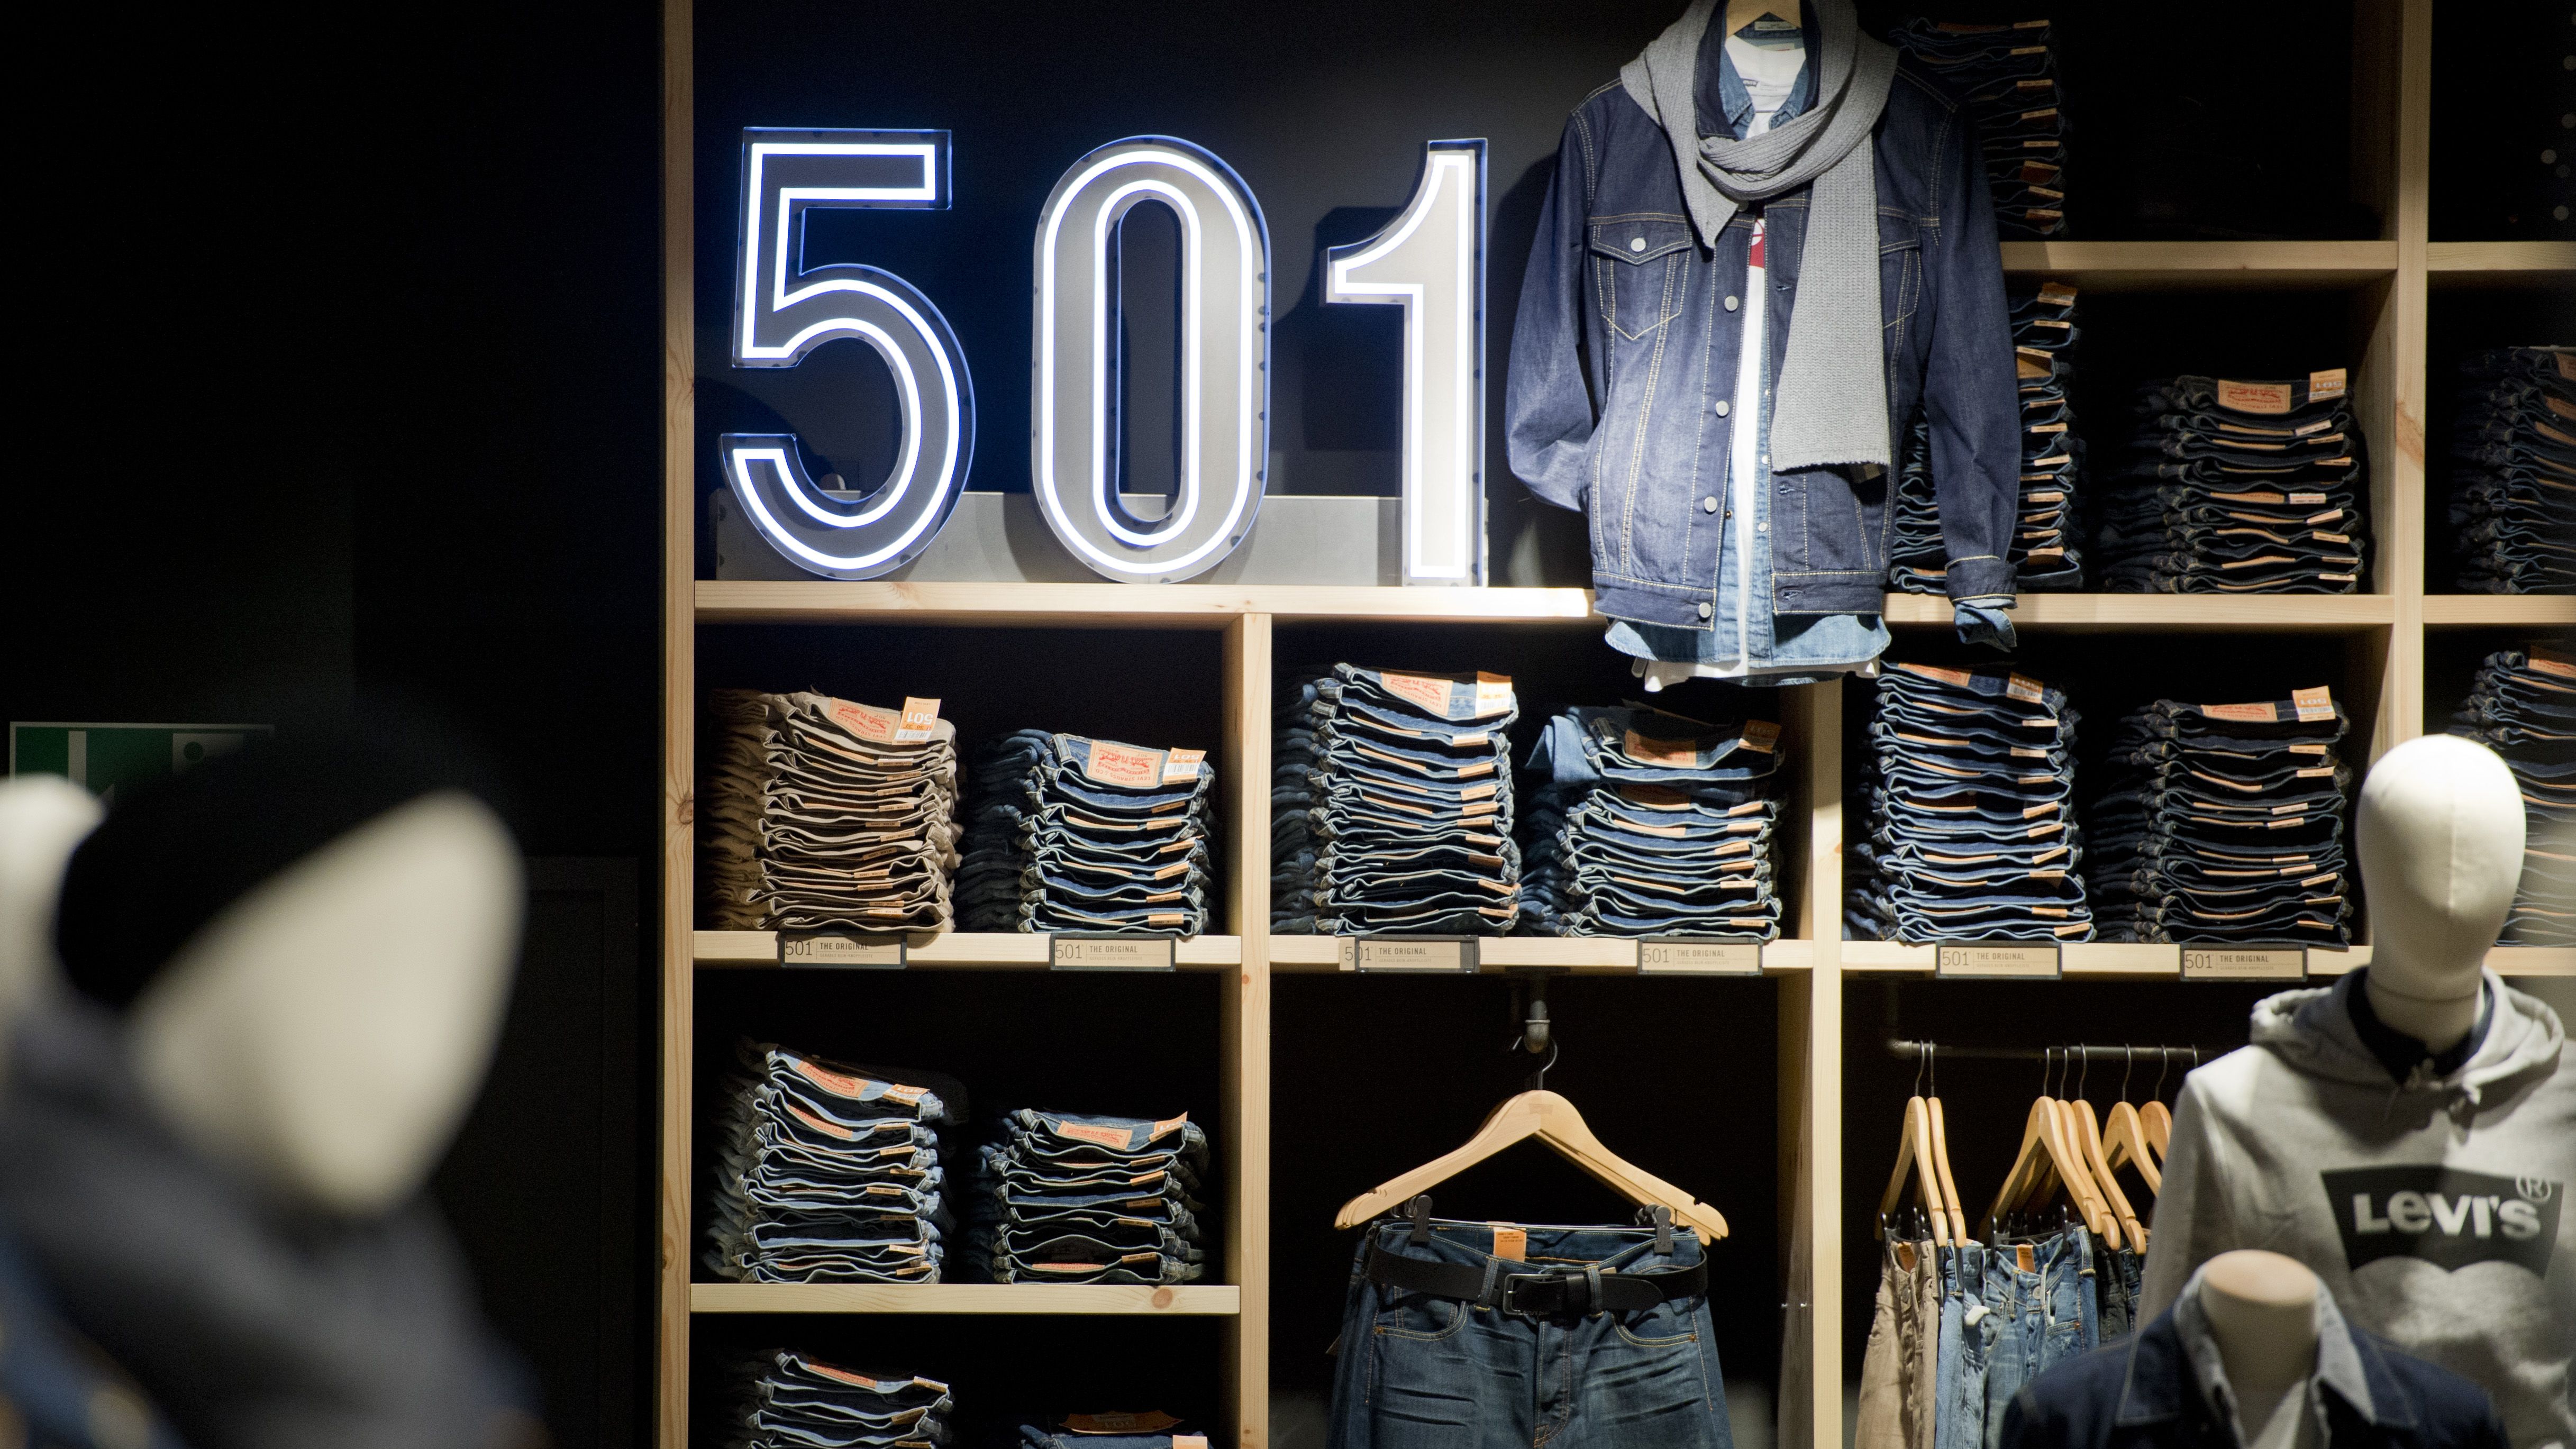 Levi's wants to be more than a jeans company, so it's going public | CNN  Business